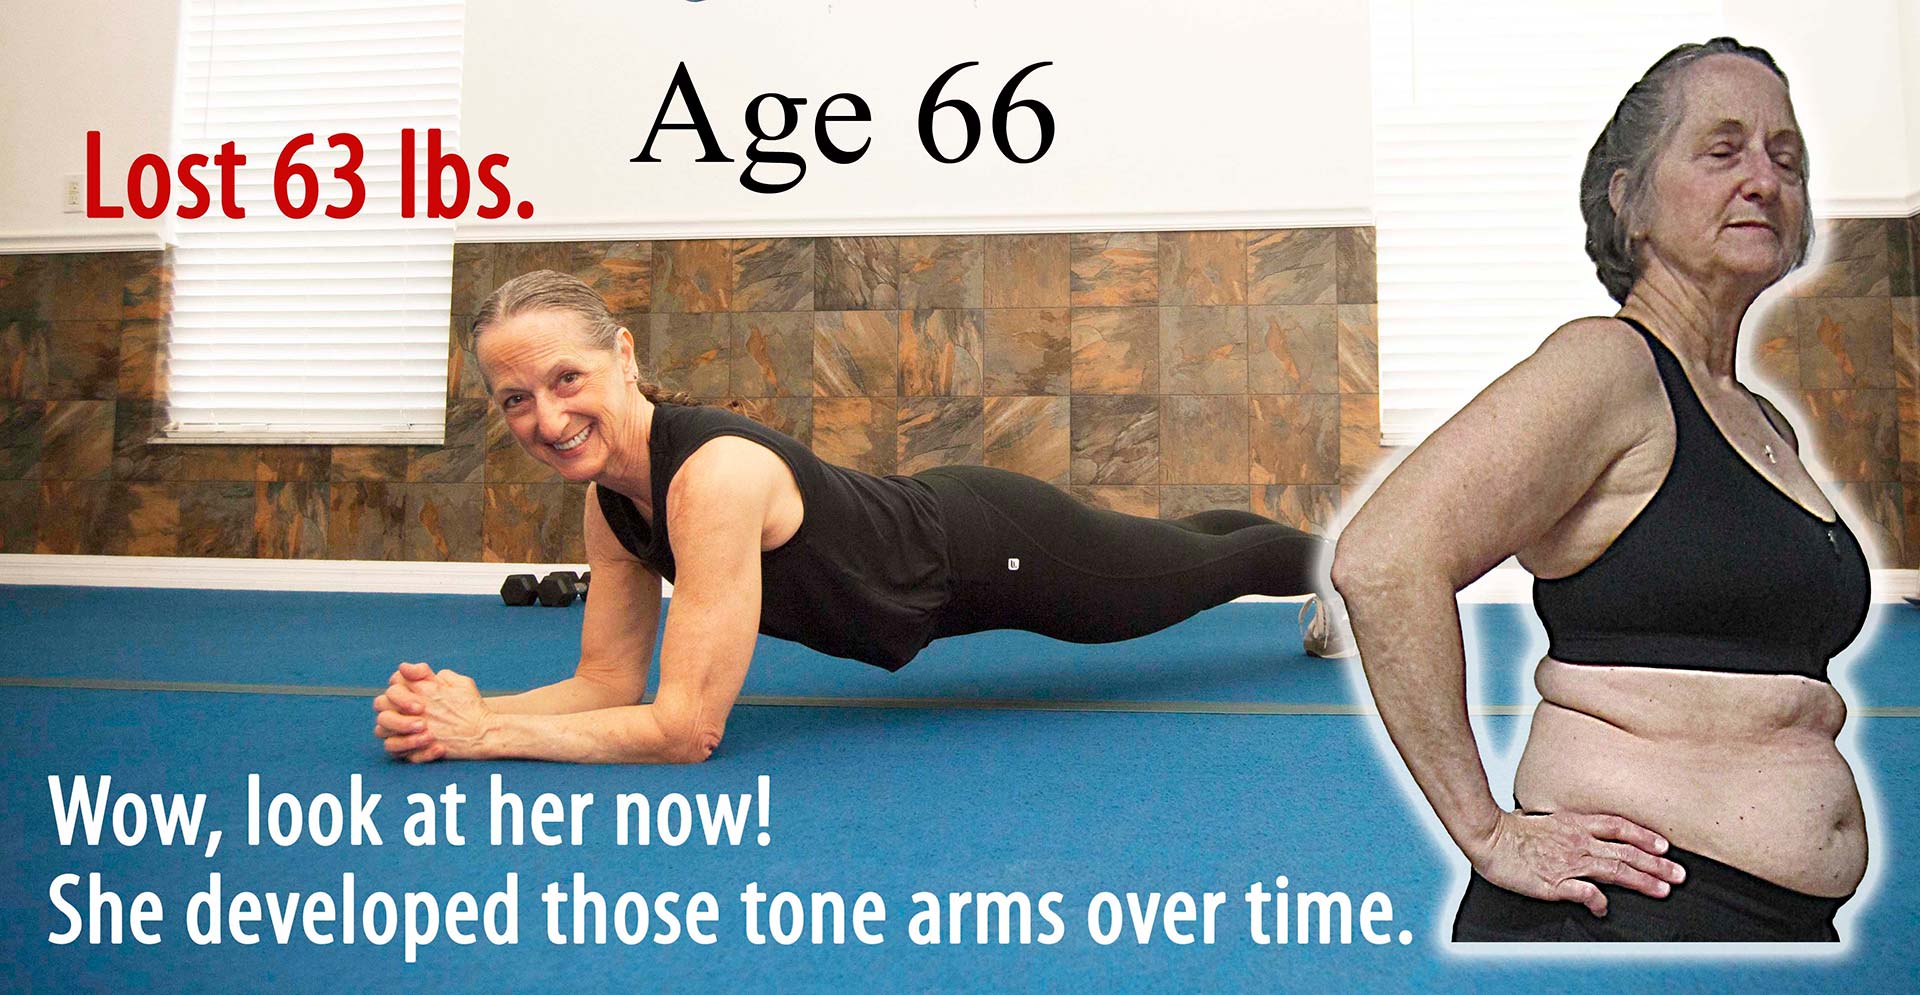 Land O' Lakes Personal Training Member Kate lost 60 lbs. with us